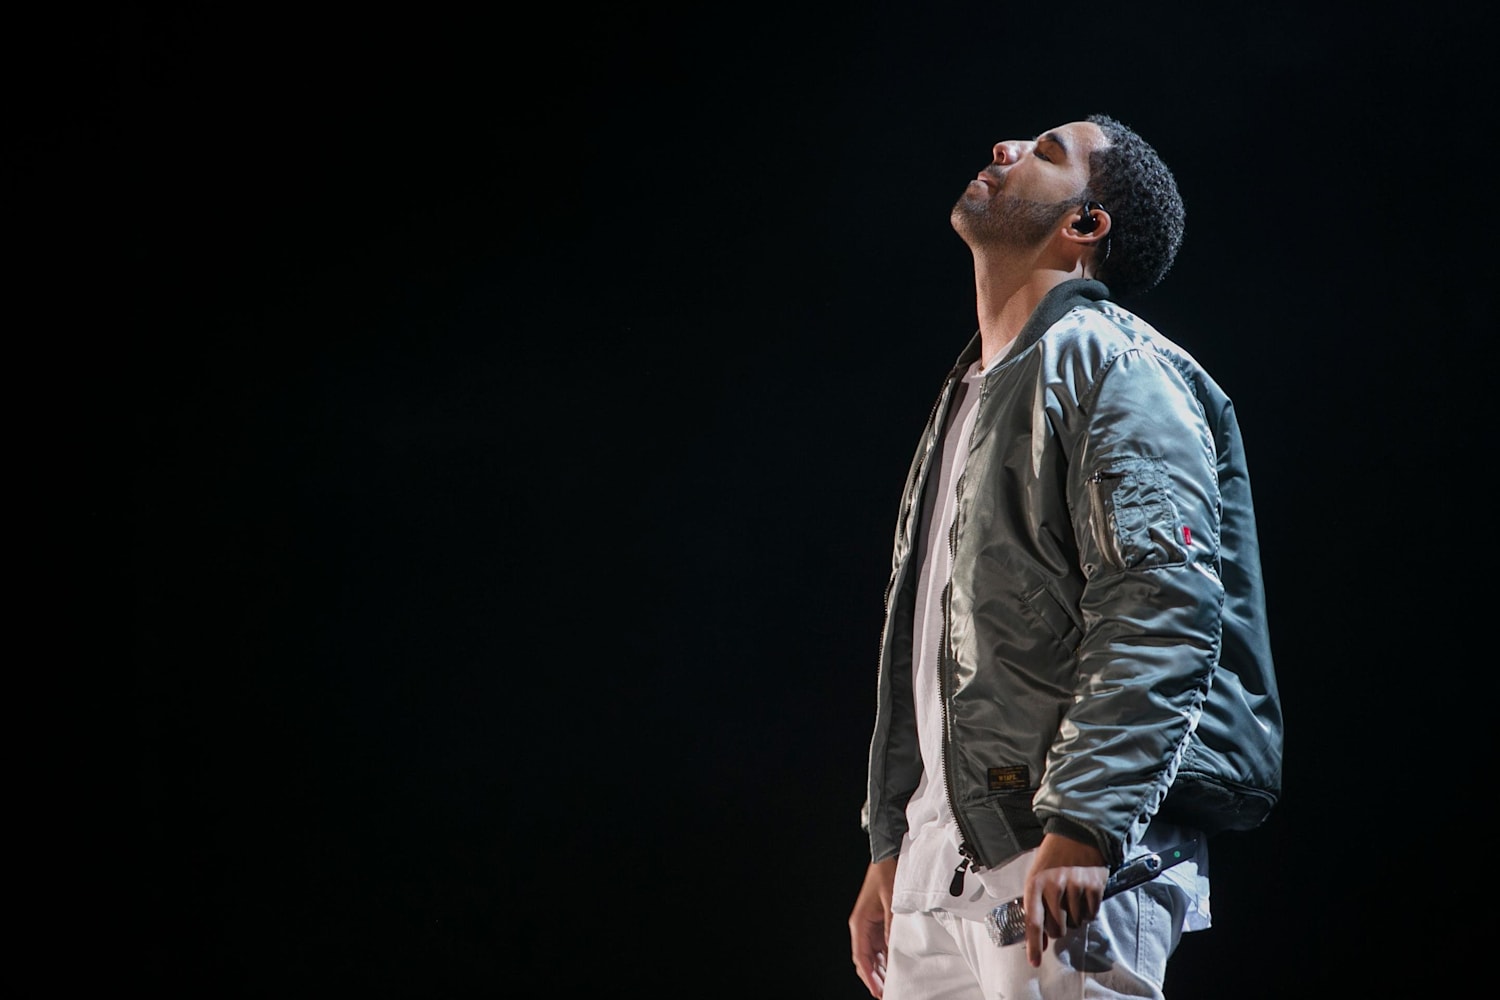 20 Drake Lyrics You Can Use Every Day Well, some nights, i wish that this all would end, cause i could use some friends for a change. 20 drake lyrics you can use every day